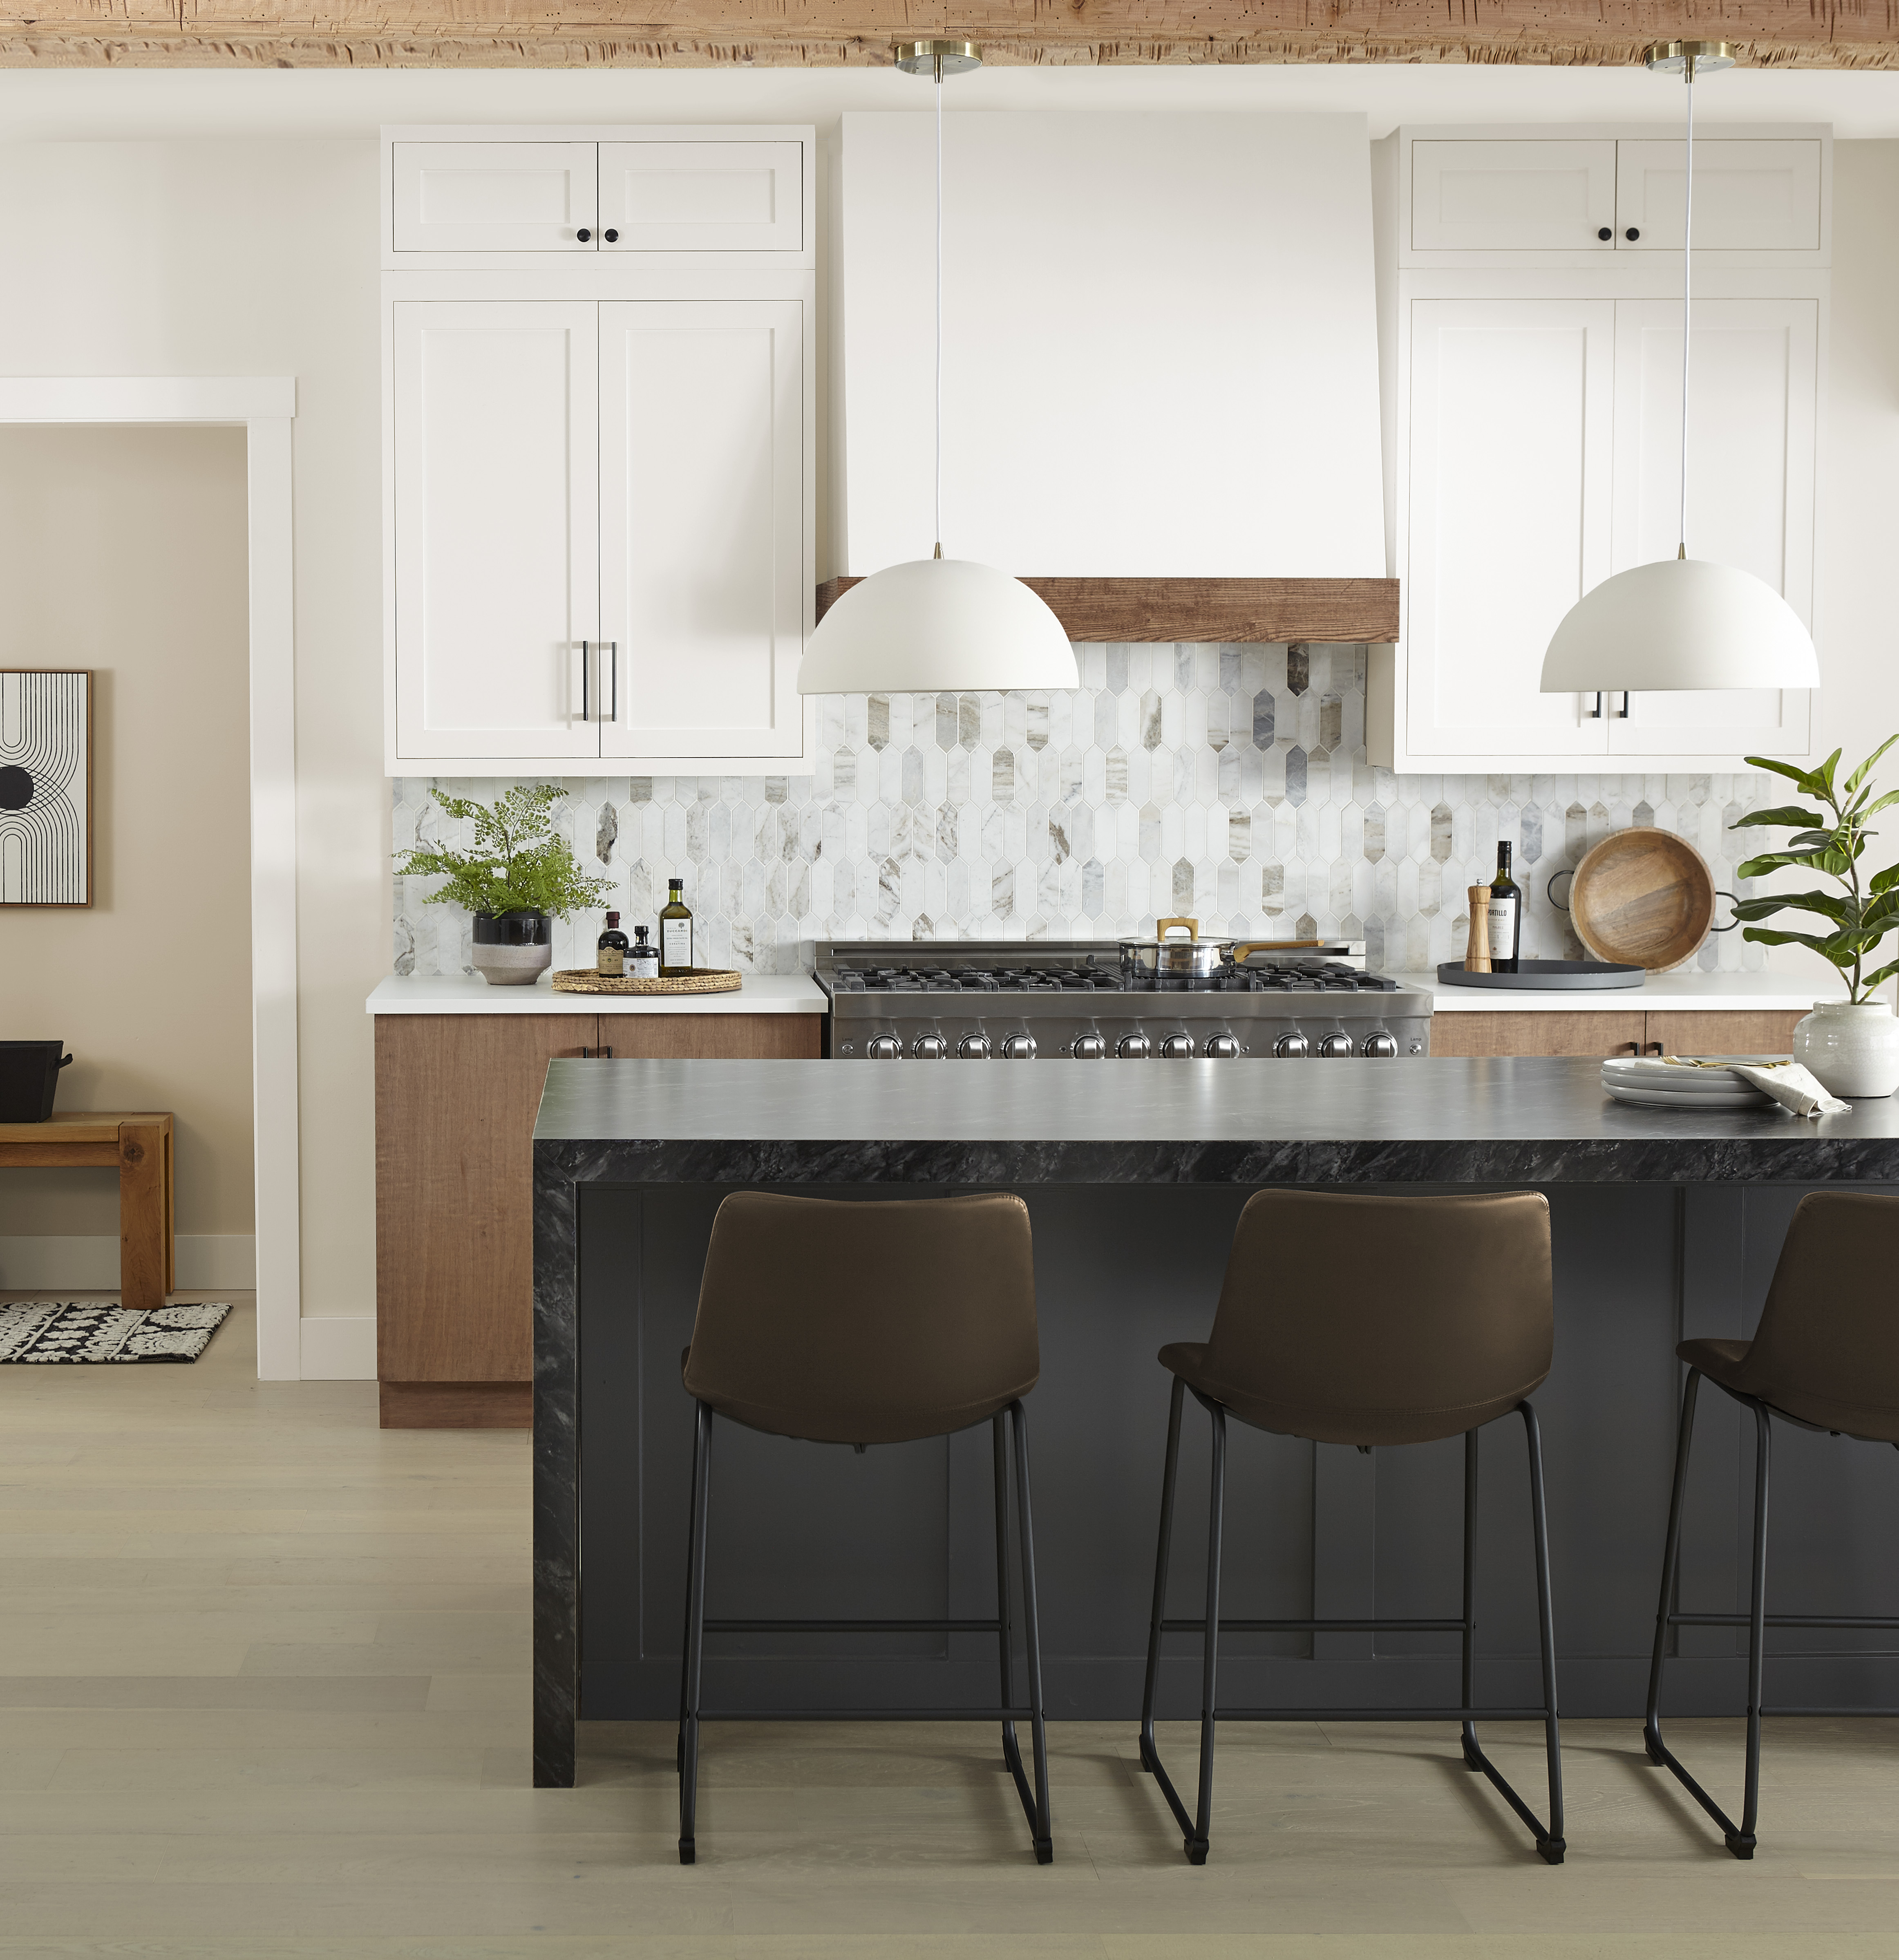 A white and wood kitchen with an accent kitchen island in the colour Cracked Pepper